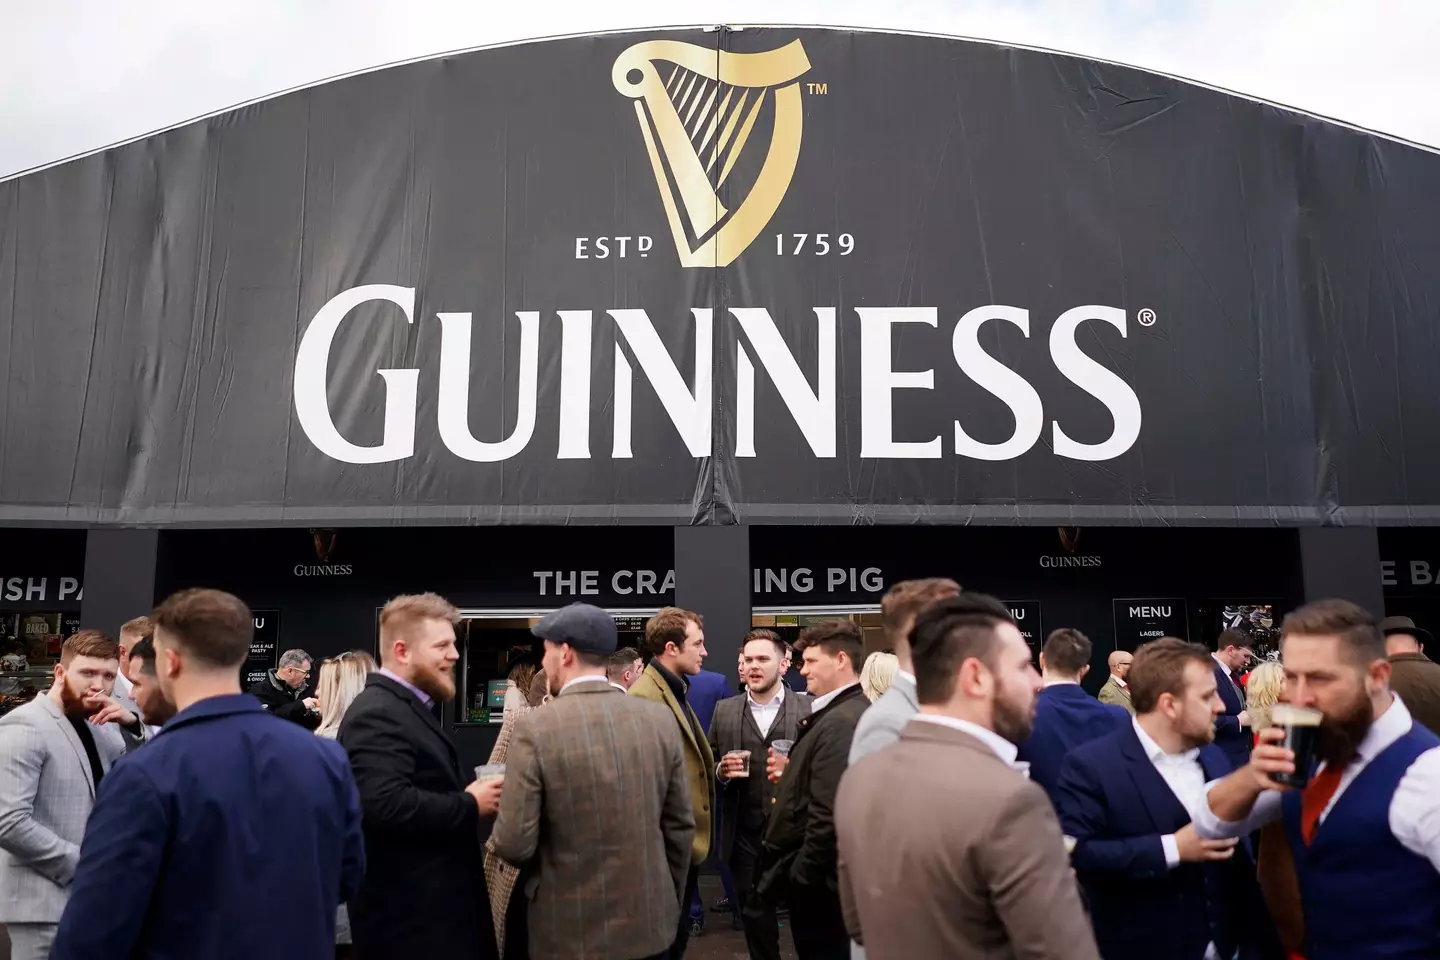 Fans are outraged at the price of a pint of Guinness at this year's Cheltenham Festival.